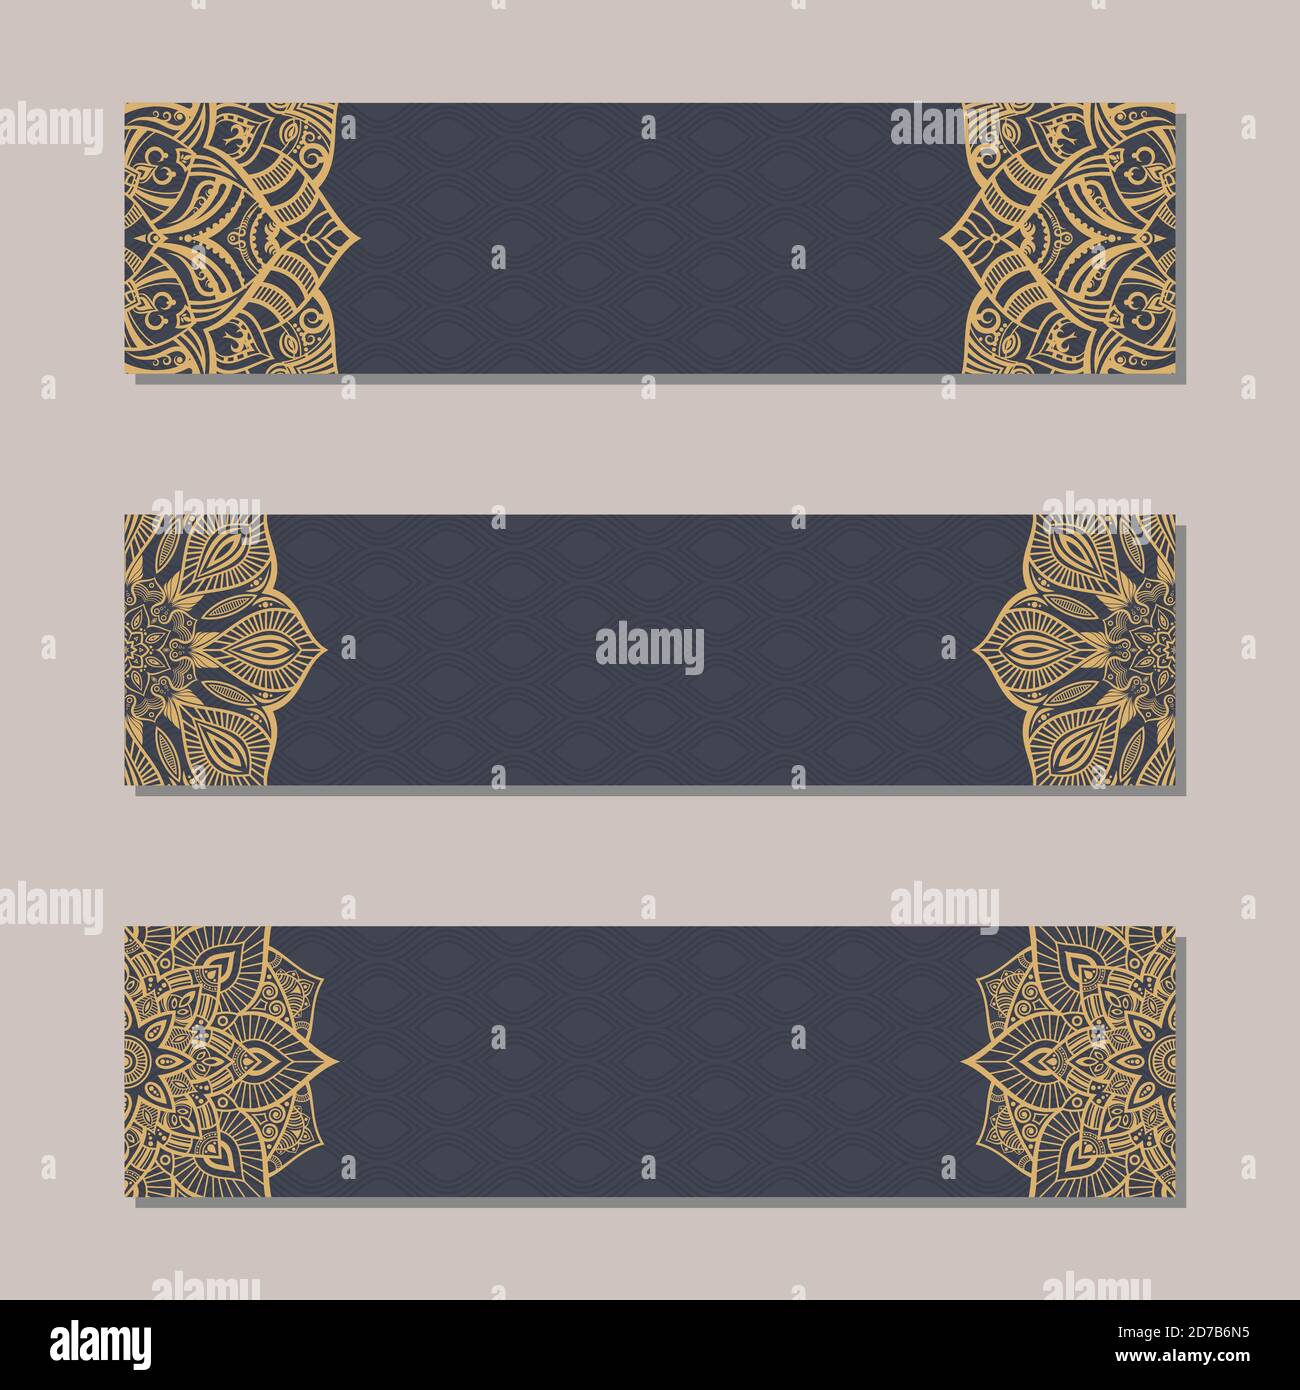 Vector set 3 banners with traditional indian ornaments, lace orient mandala. Decorative elements.  Ethnic Mandala ornament. Islam, Arabic, Indian. Stock Vector